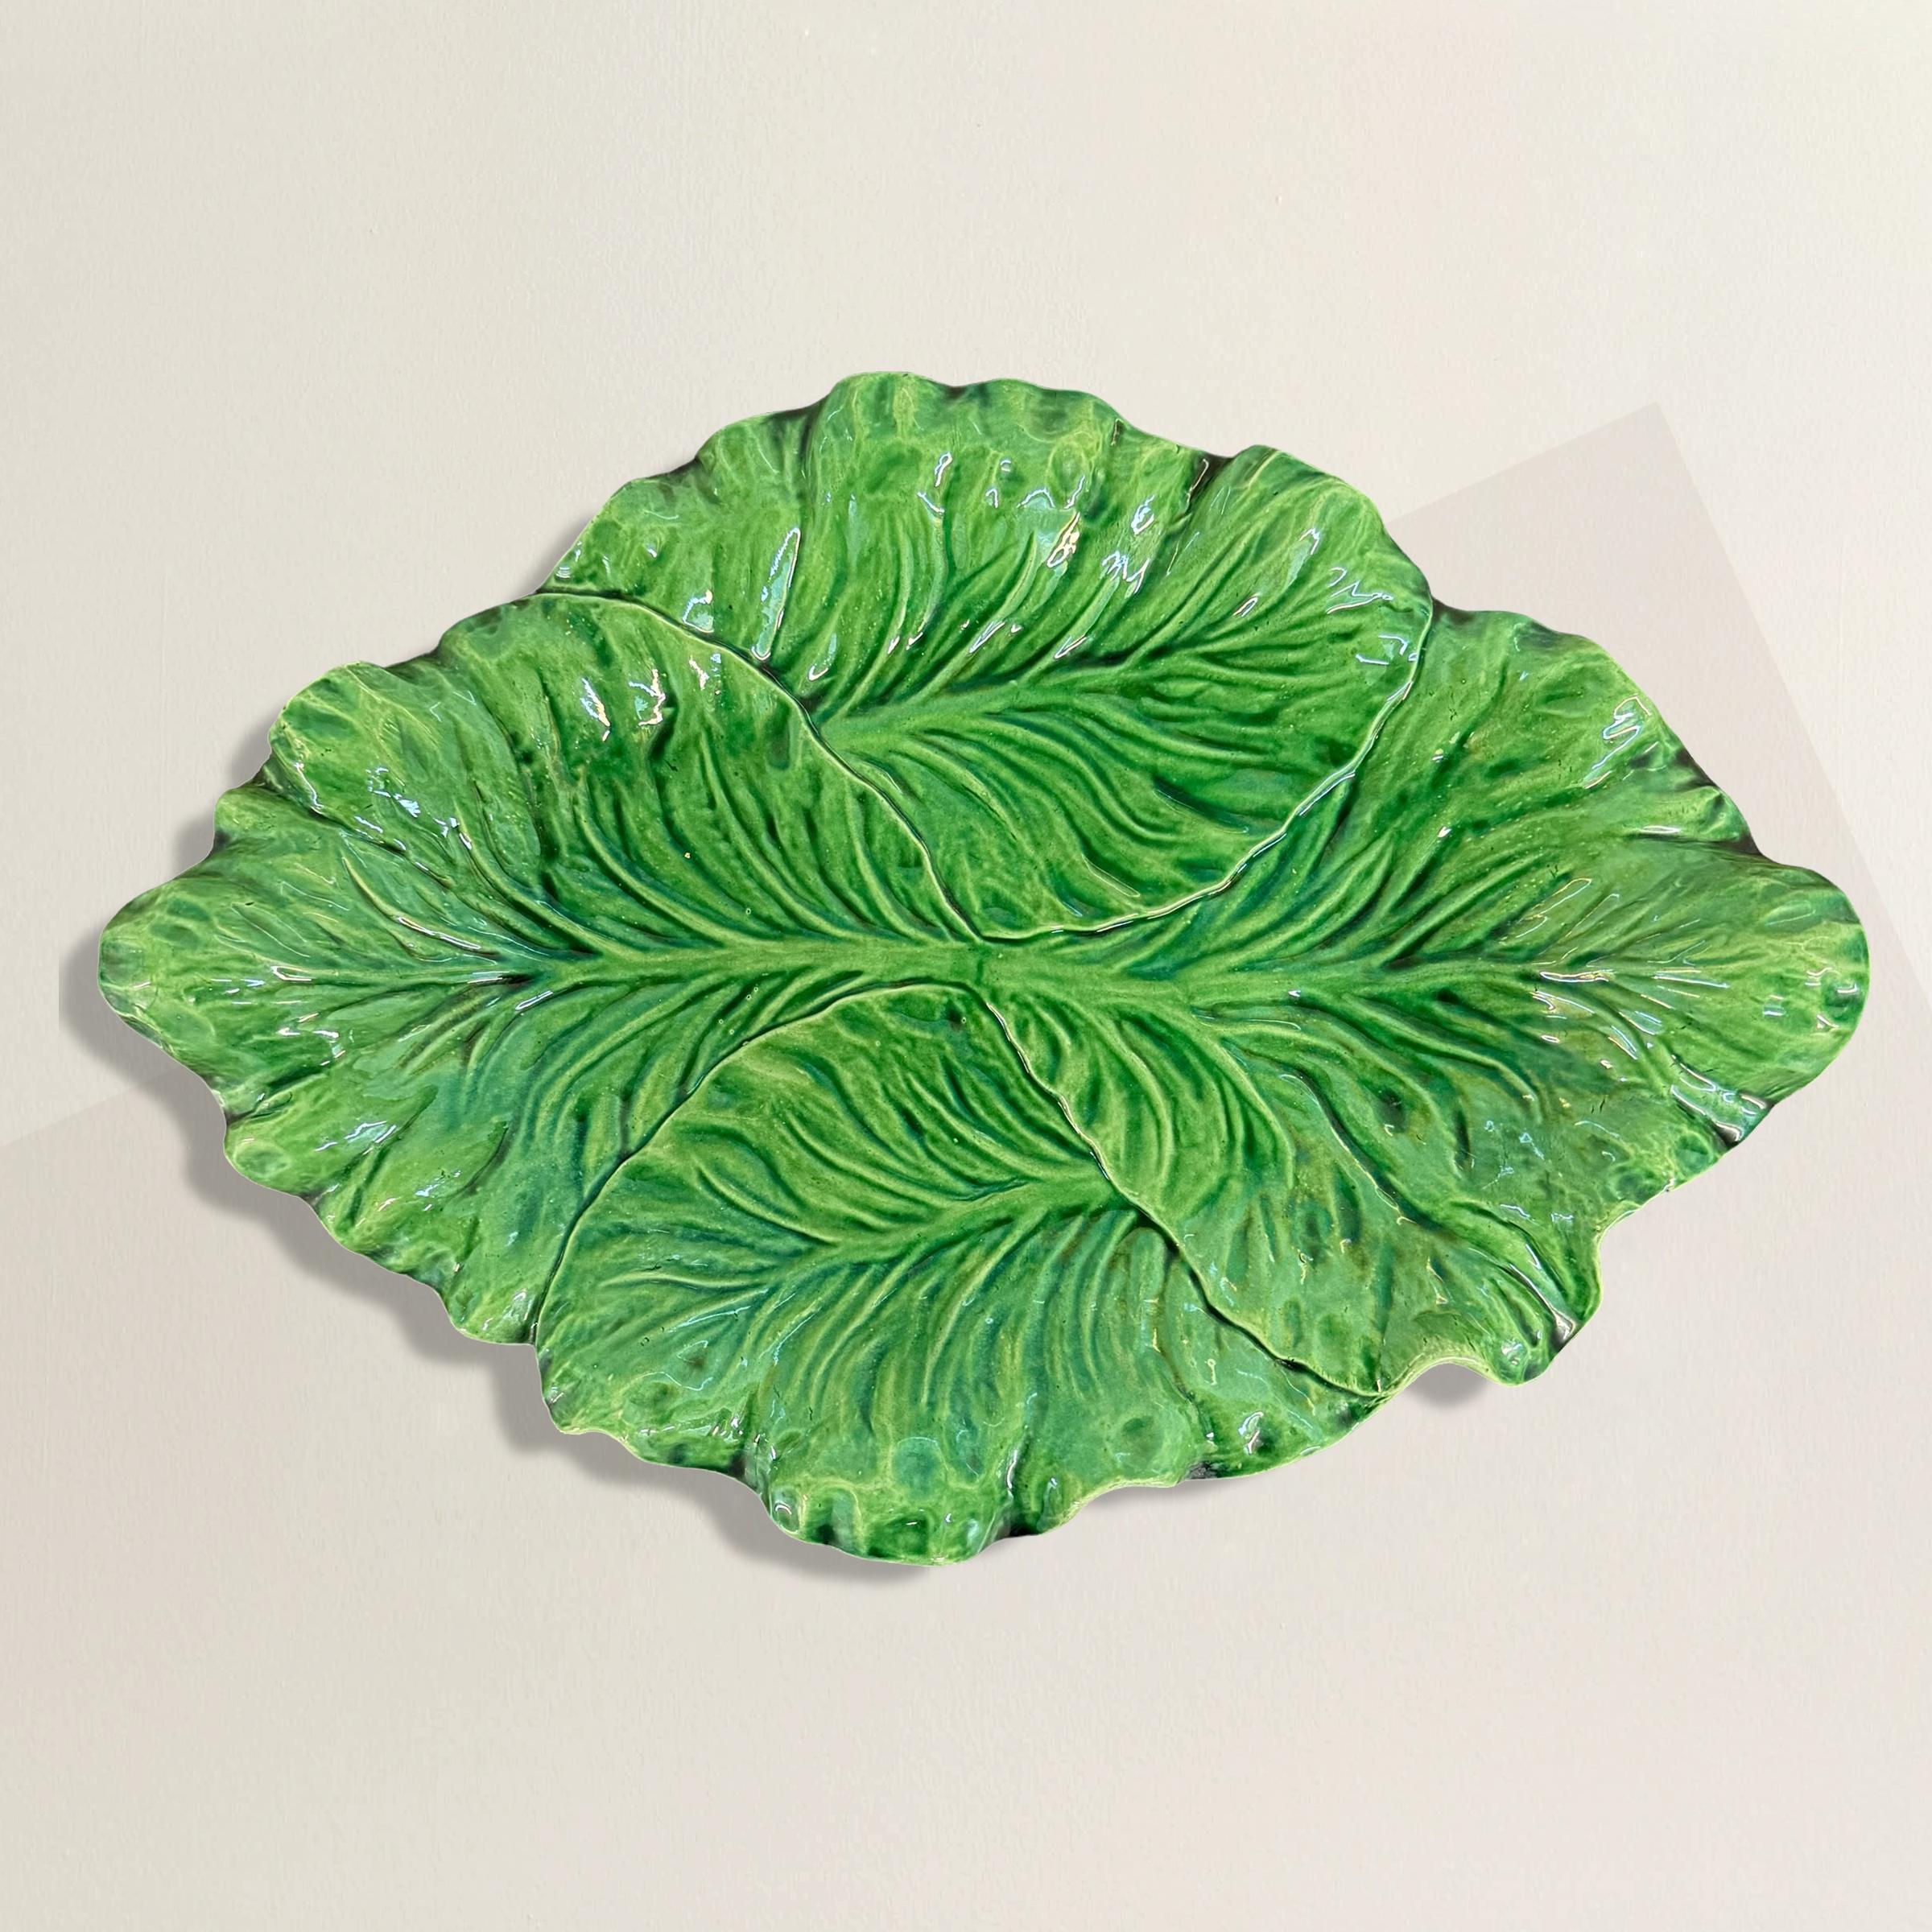 This exquisite late 20th-century Portuguese ceramic cabbage platter, once a prized offering at the now-defunct but highly esteemed Bonwit Teller department store in New York City, stands as a testament to the store's legacy of luxury and elegance.